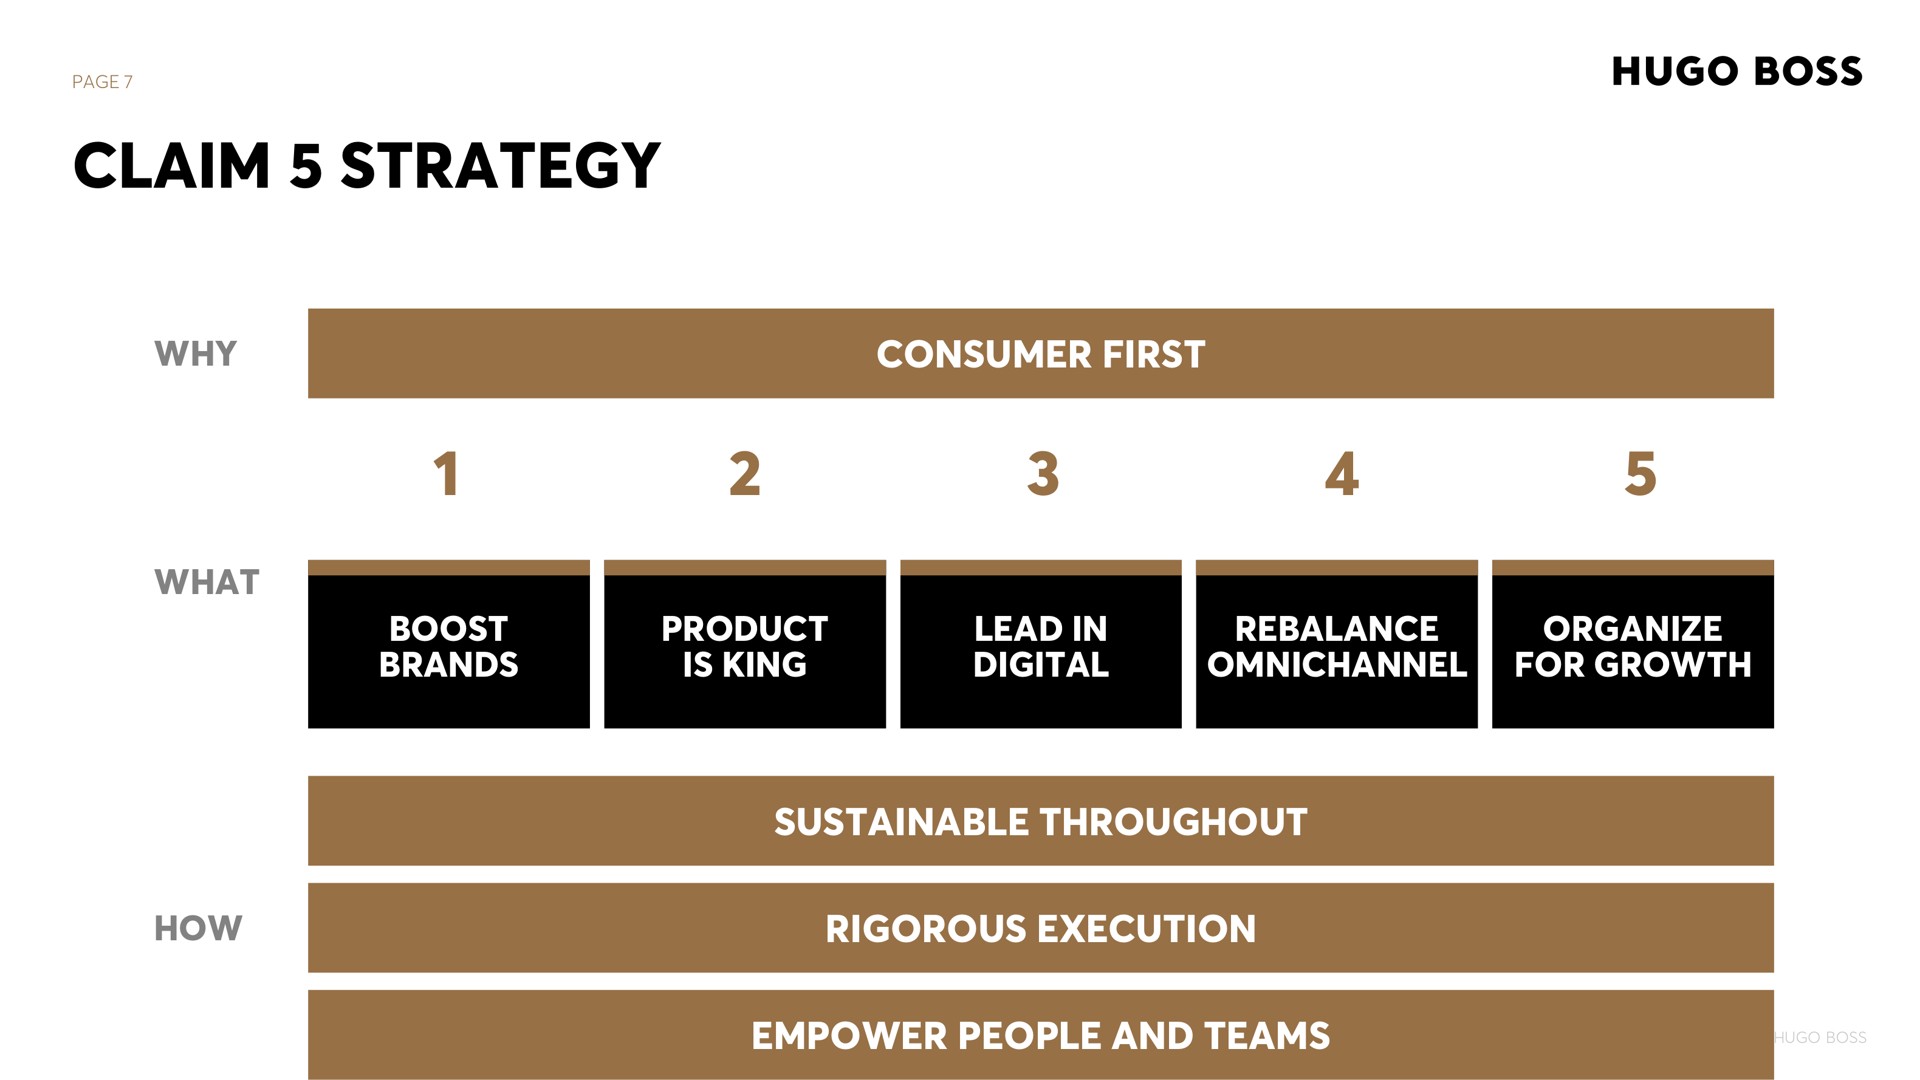 page claim strategy why what consumer first boost brands product is king lead in digital rebalance organize for growth sustainable throughout how rigorous execution empower people and teams boss | Hugo Boss